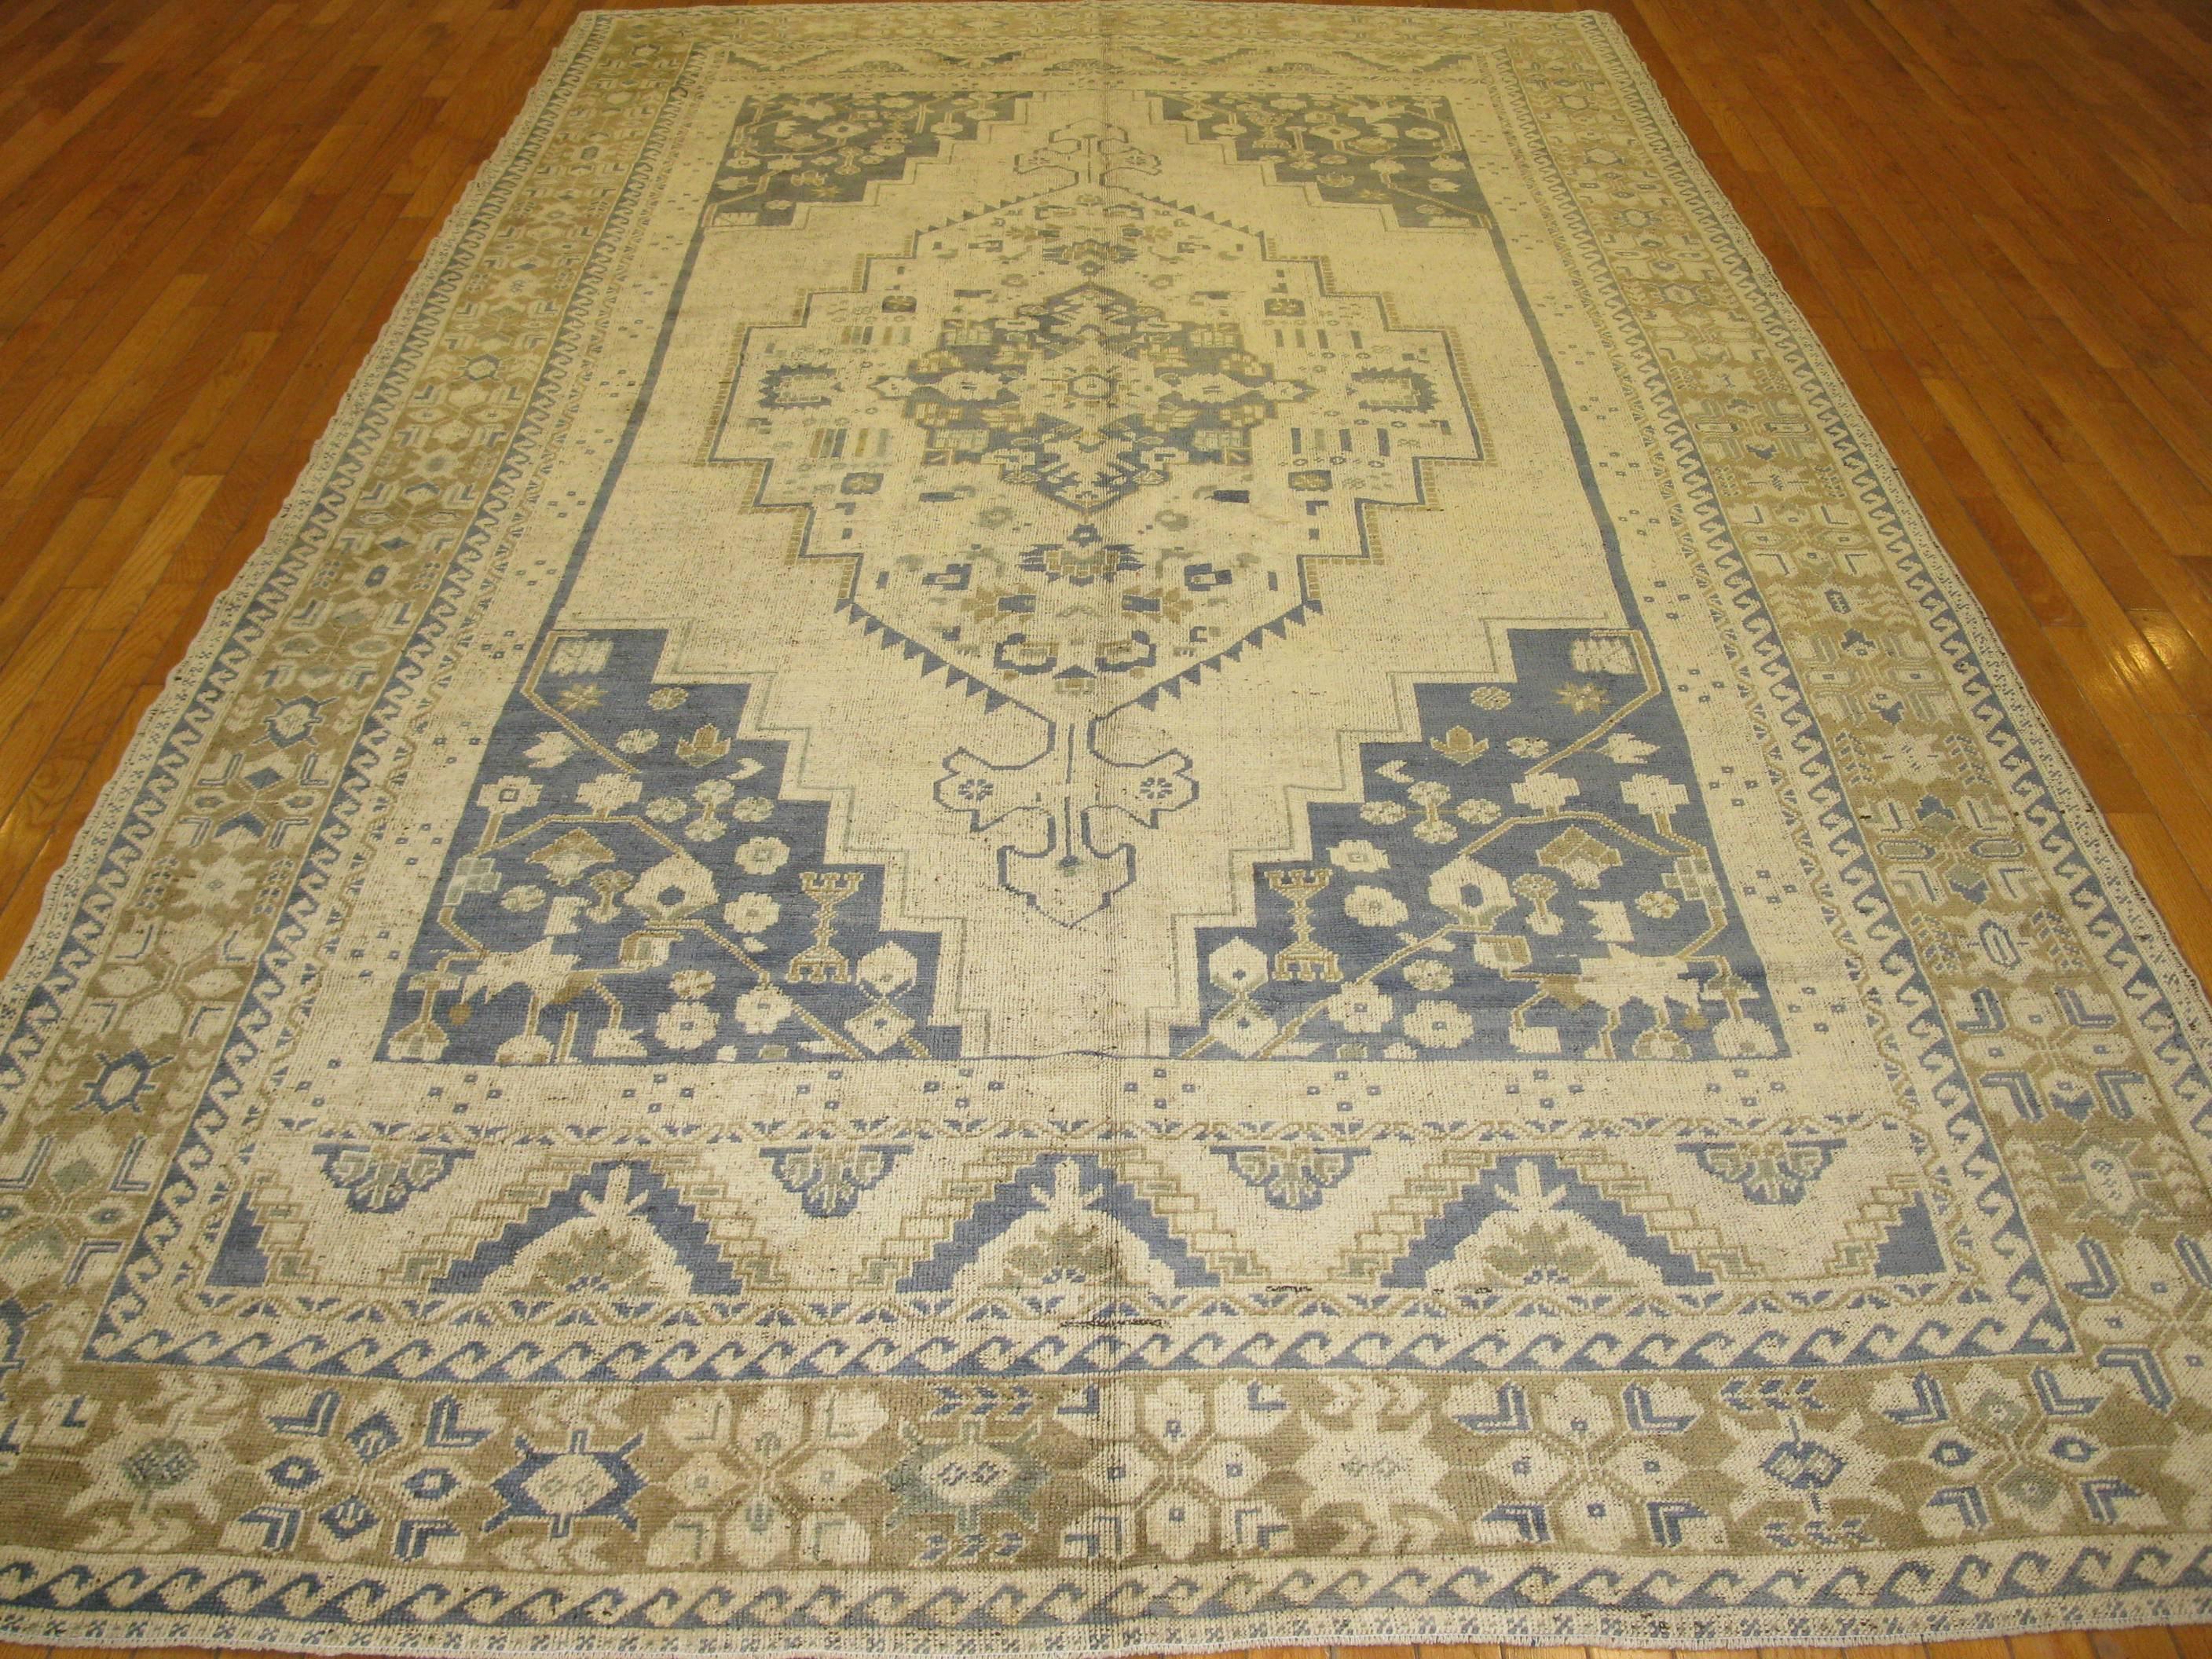 This is a vintage antique washed Turkish rug. It is hand knotted with 100% wool with an elegant geometric design. It measures 6' 8'' x 12' 2''.